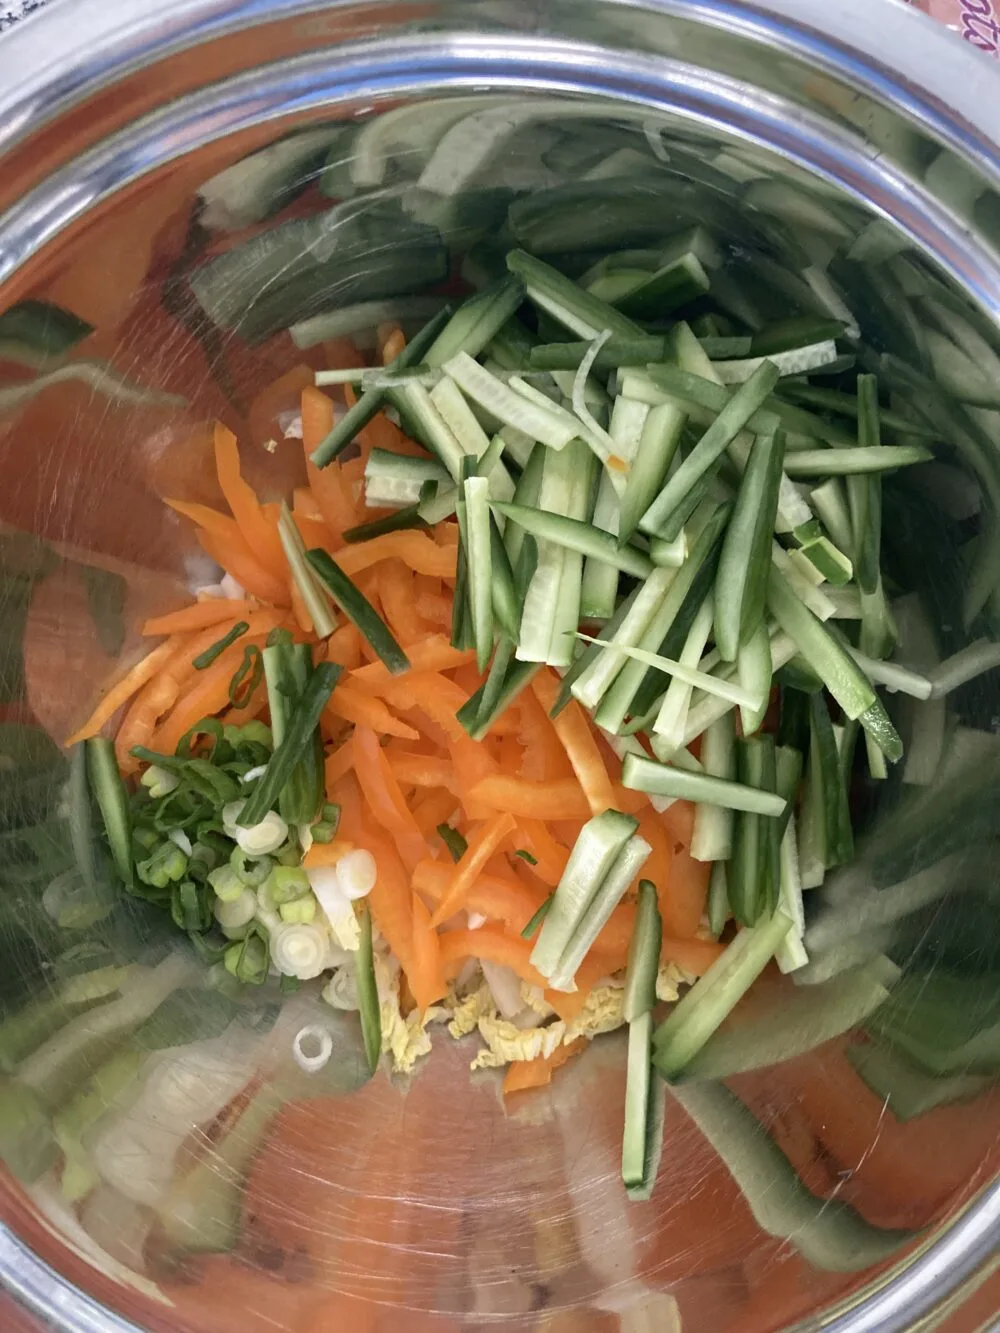 Julienne cut veggies in greens and orange are shown in a metal mixing bowl